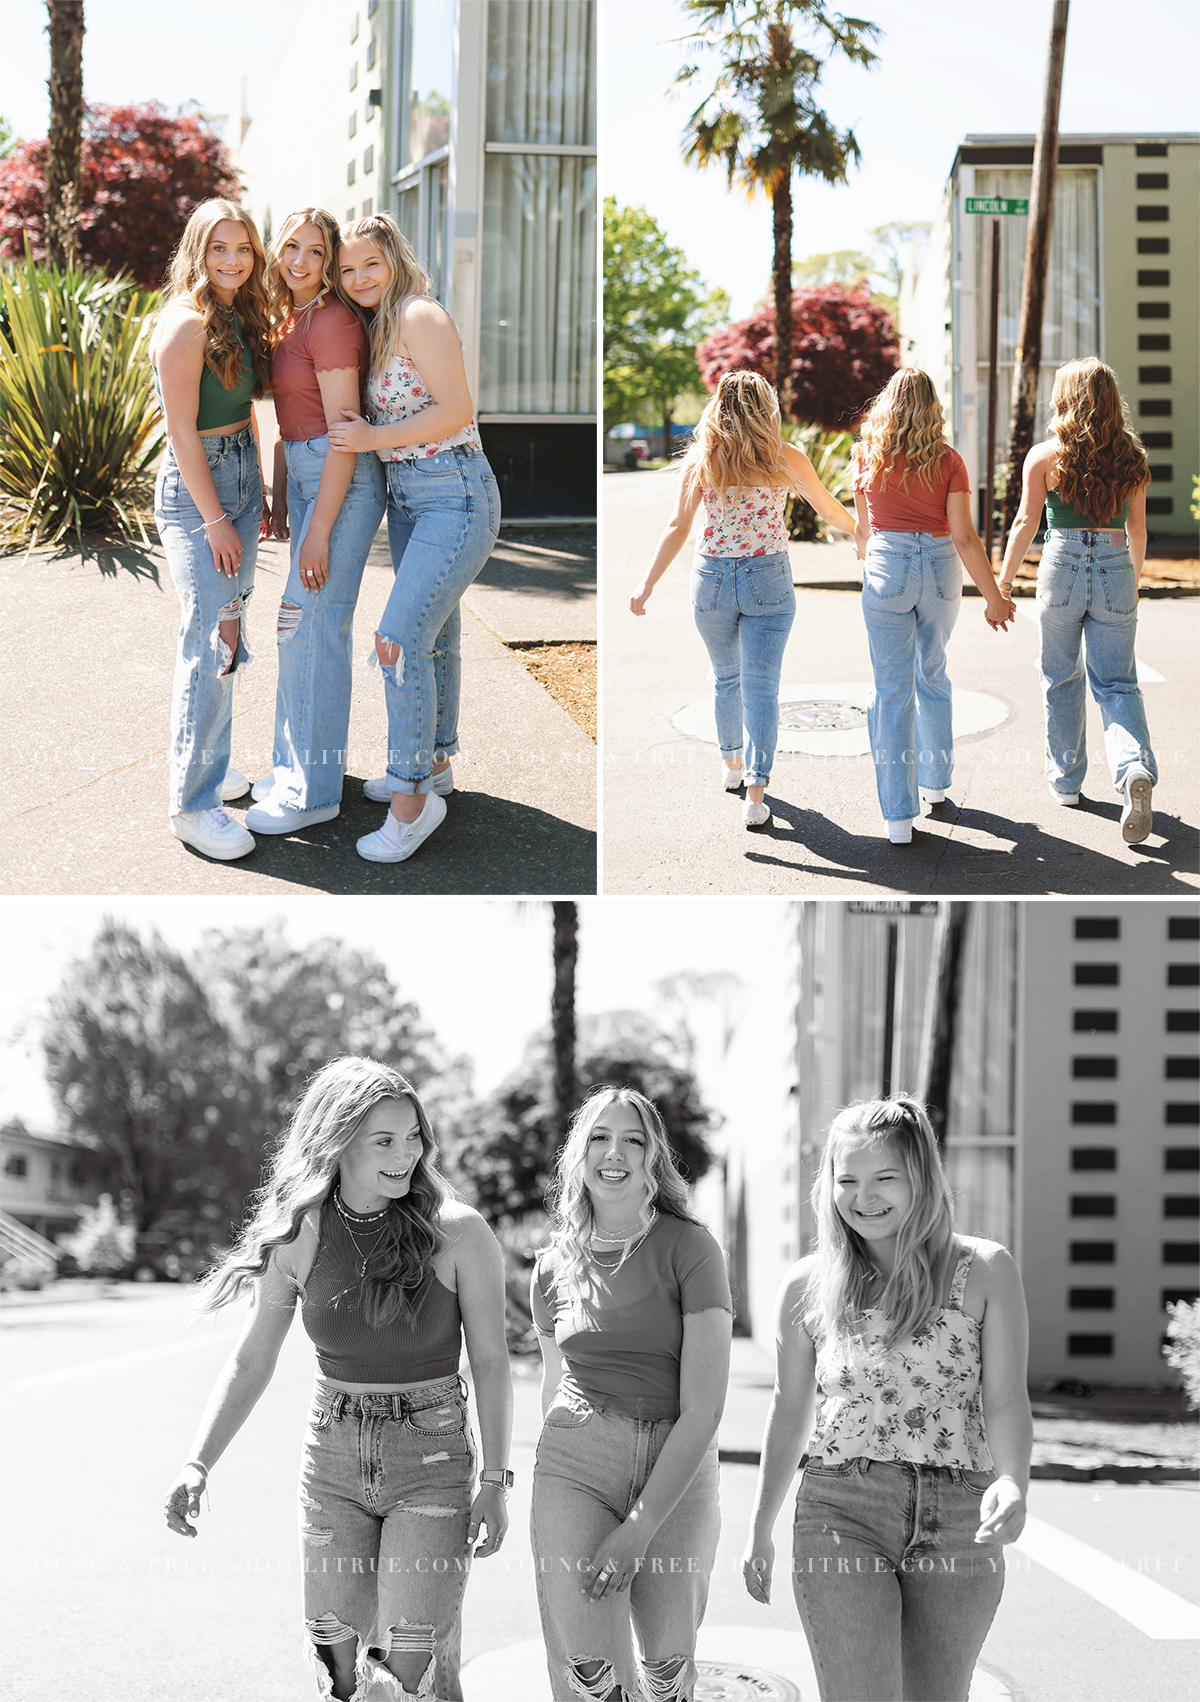 Personality-infused senior pictures with three best friends in an urban location